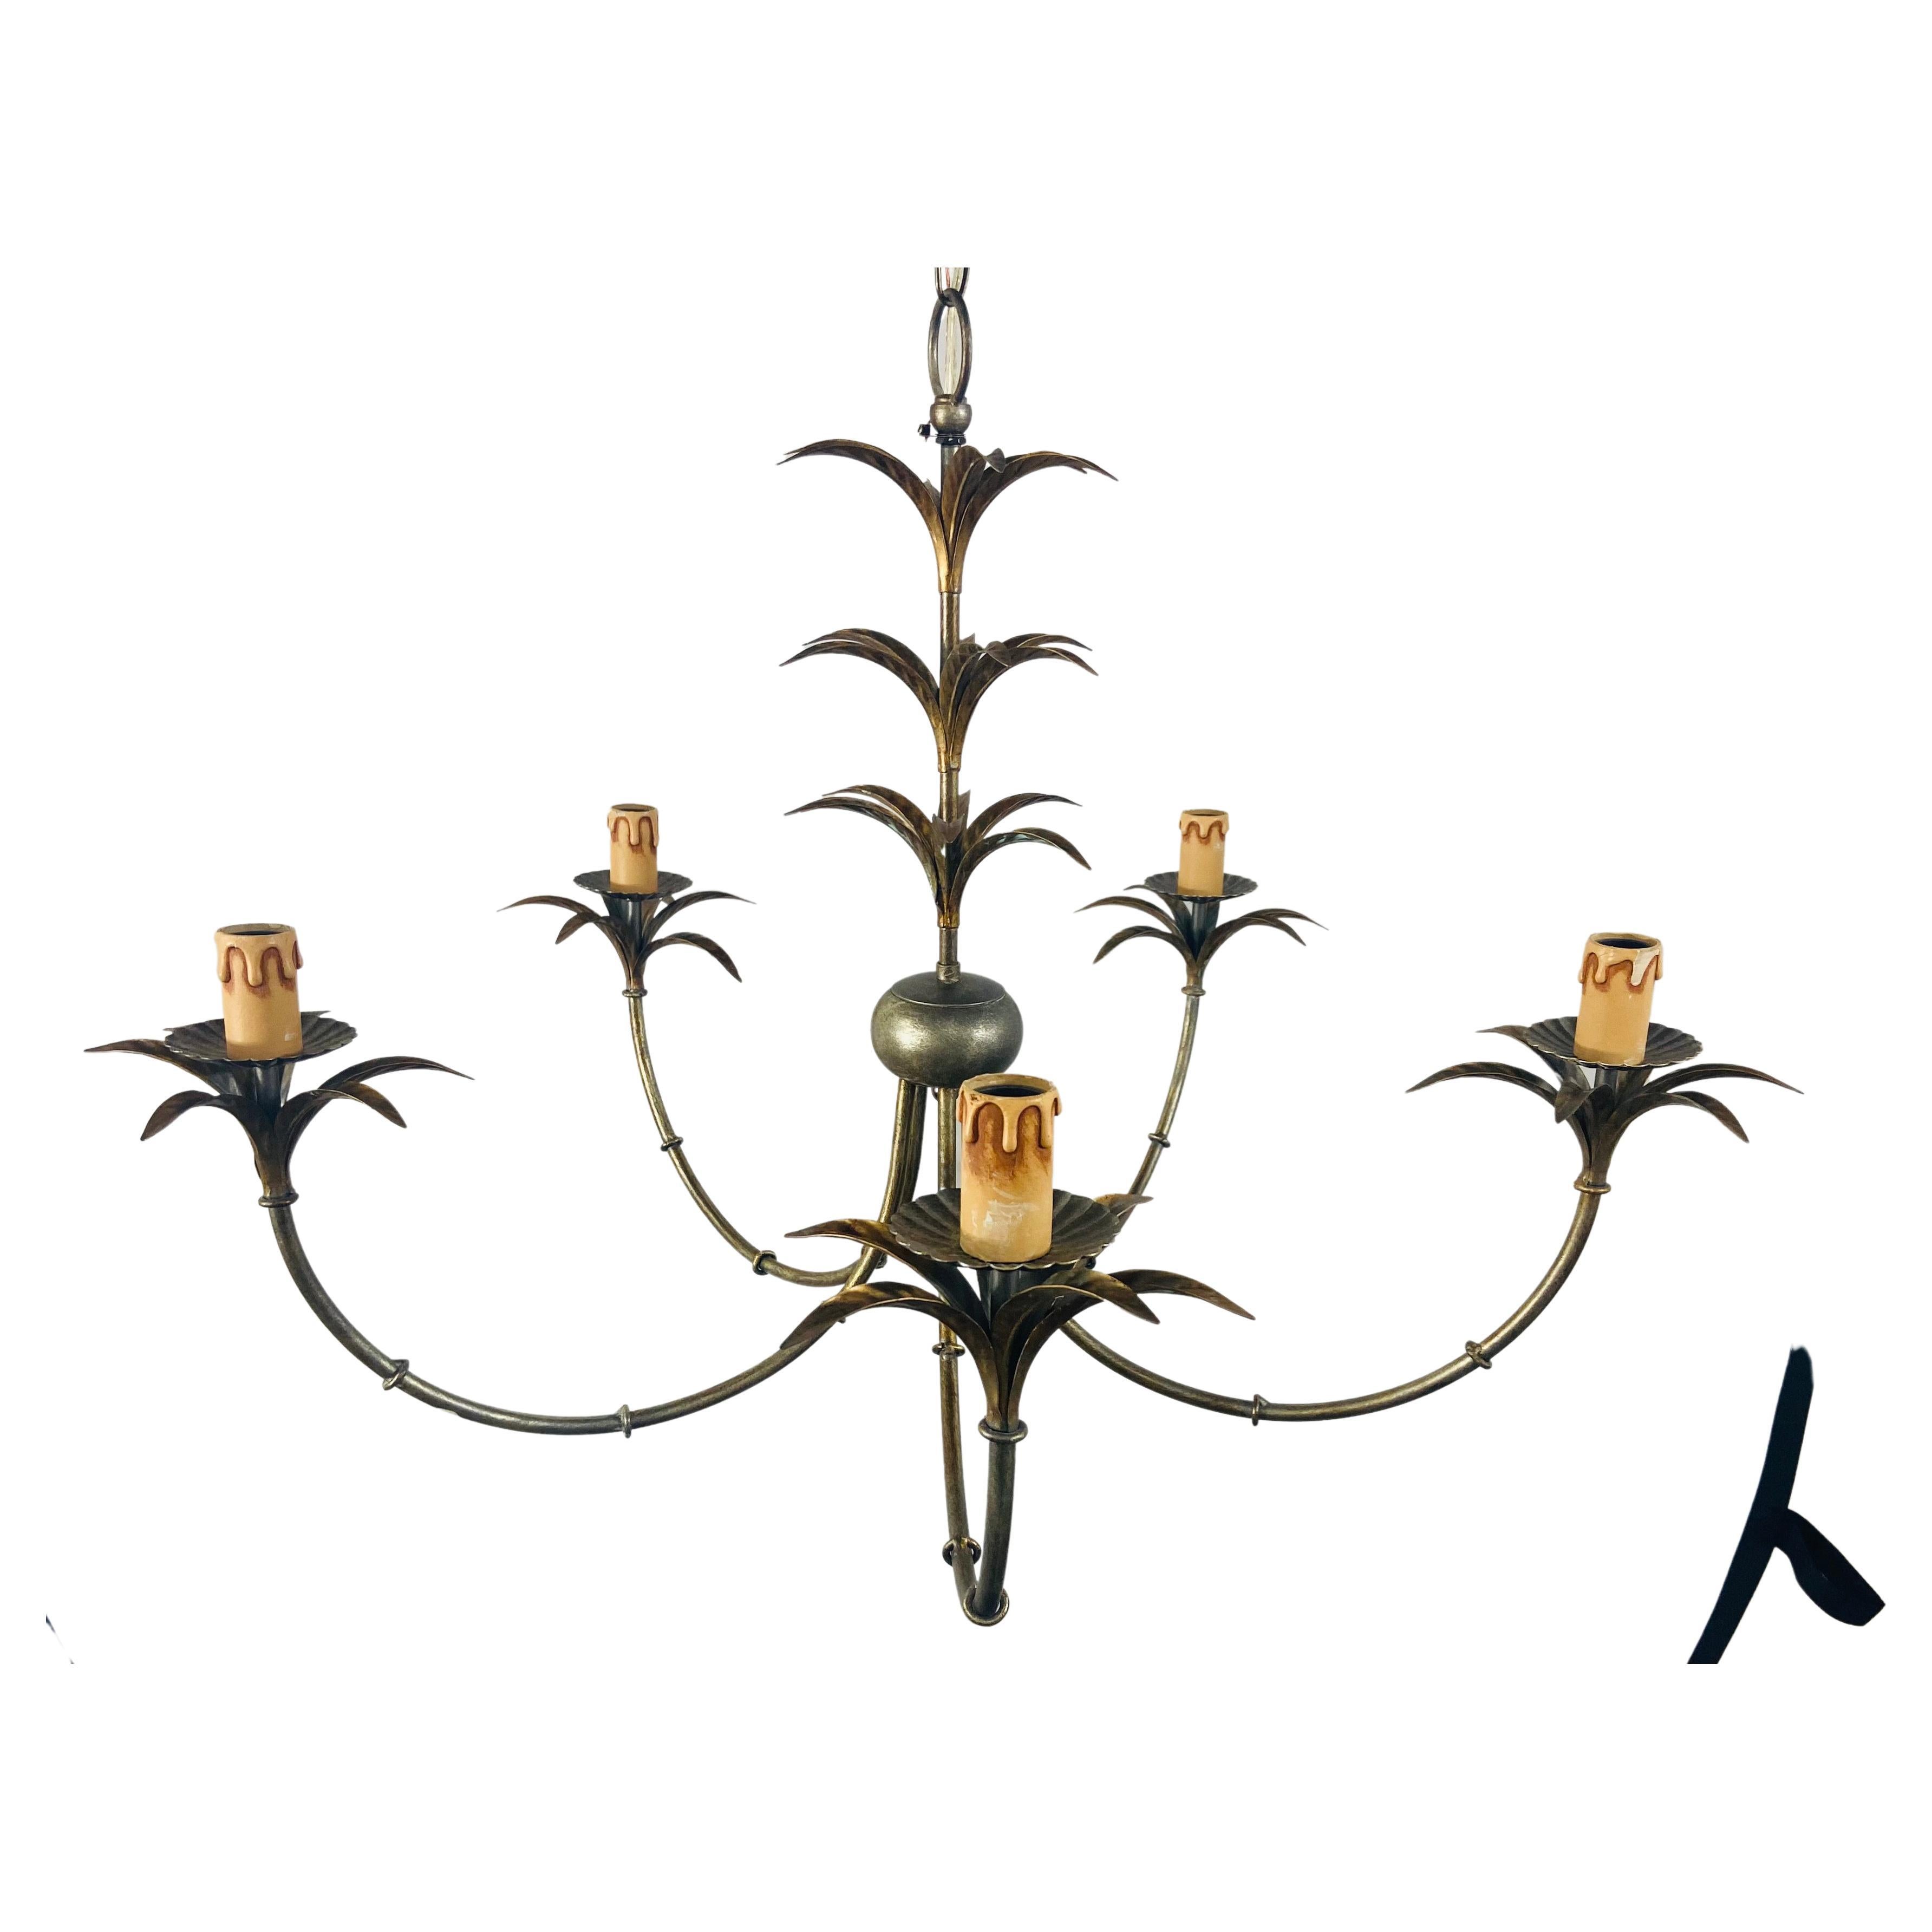 A classic and elegant French Hollywood Regency style chandelier in antique brass finish, The Chandelier has five fine arms , each arms ends in a palm tree /leaves design and holding a candelabra bulb. The chandelier column is also hand carved in the